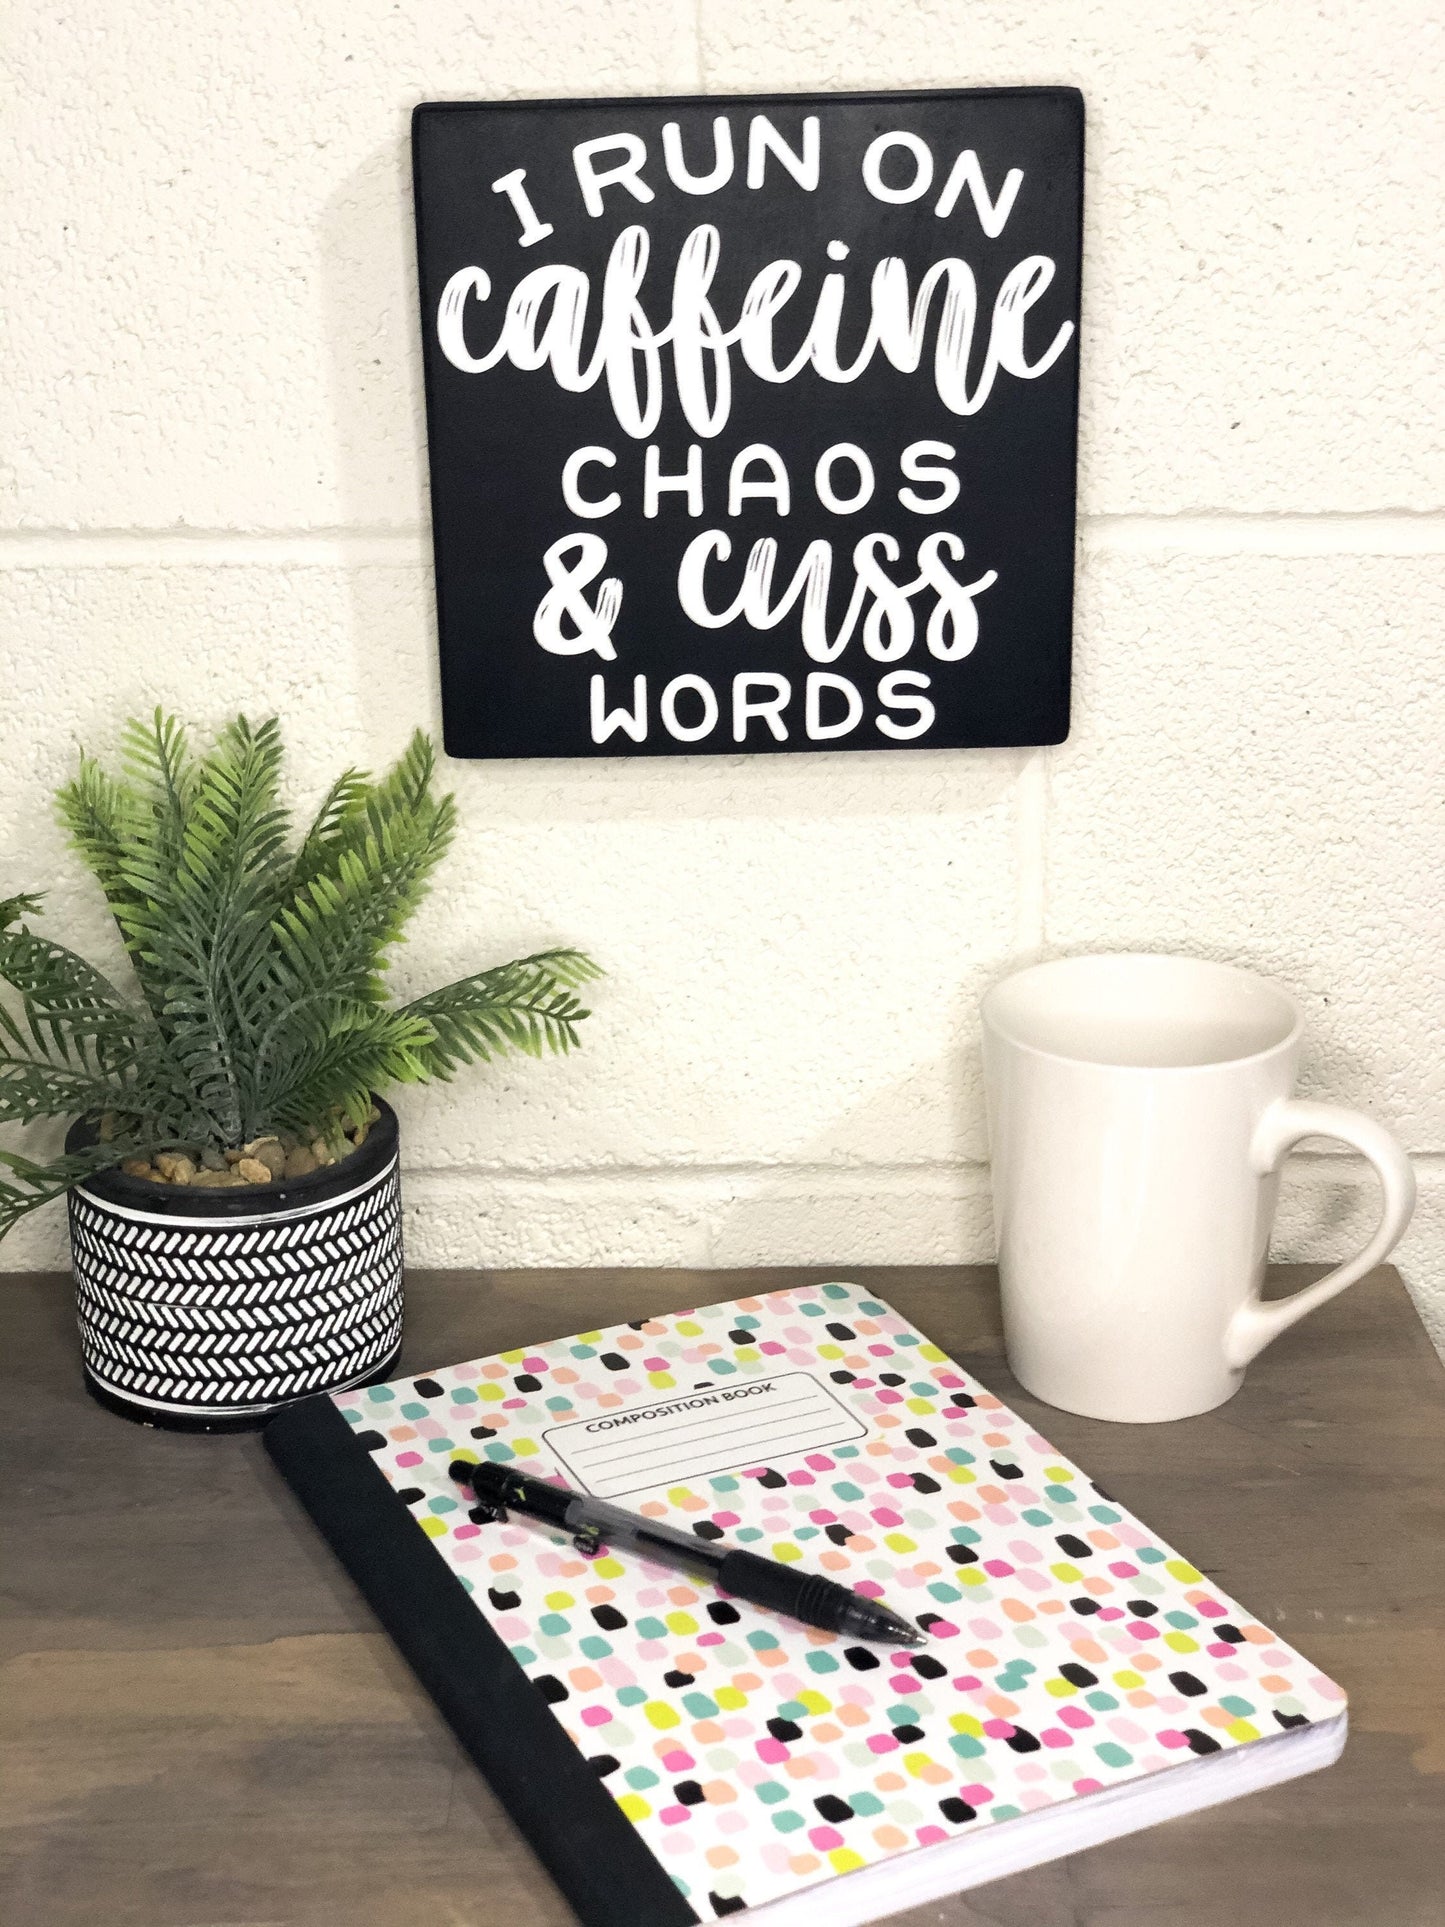 I Run On Caffeine Chaos And Cuss Words - Funny Sign - Office Decor - Inspirational Words - Home Decorations